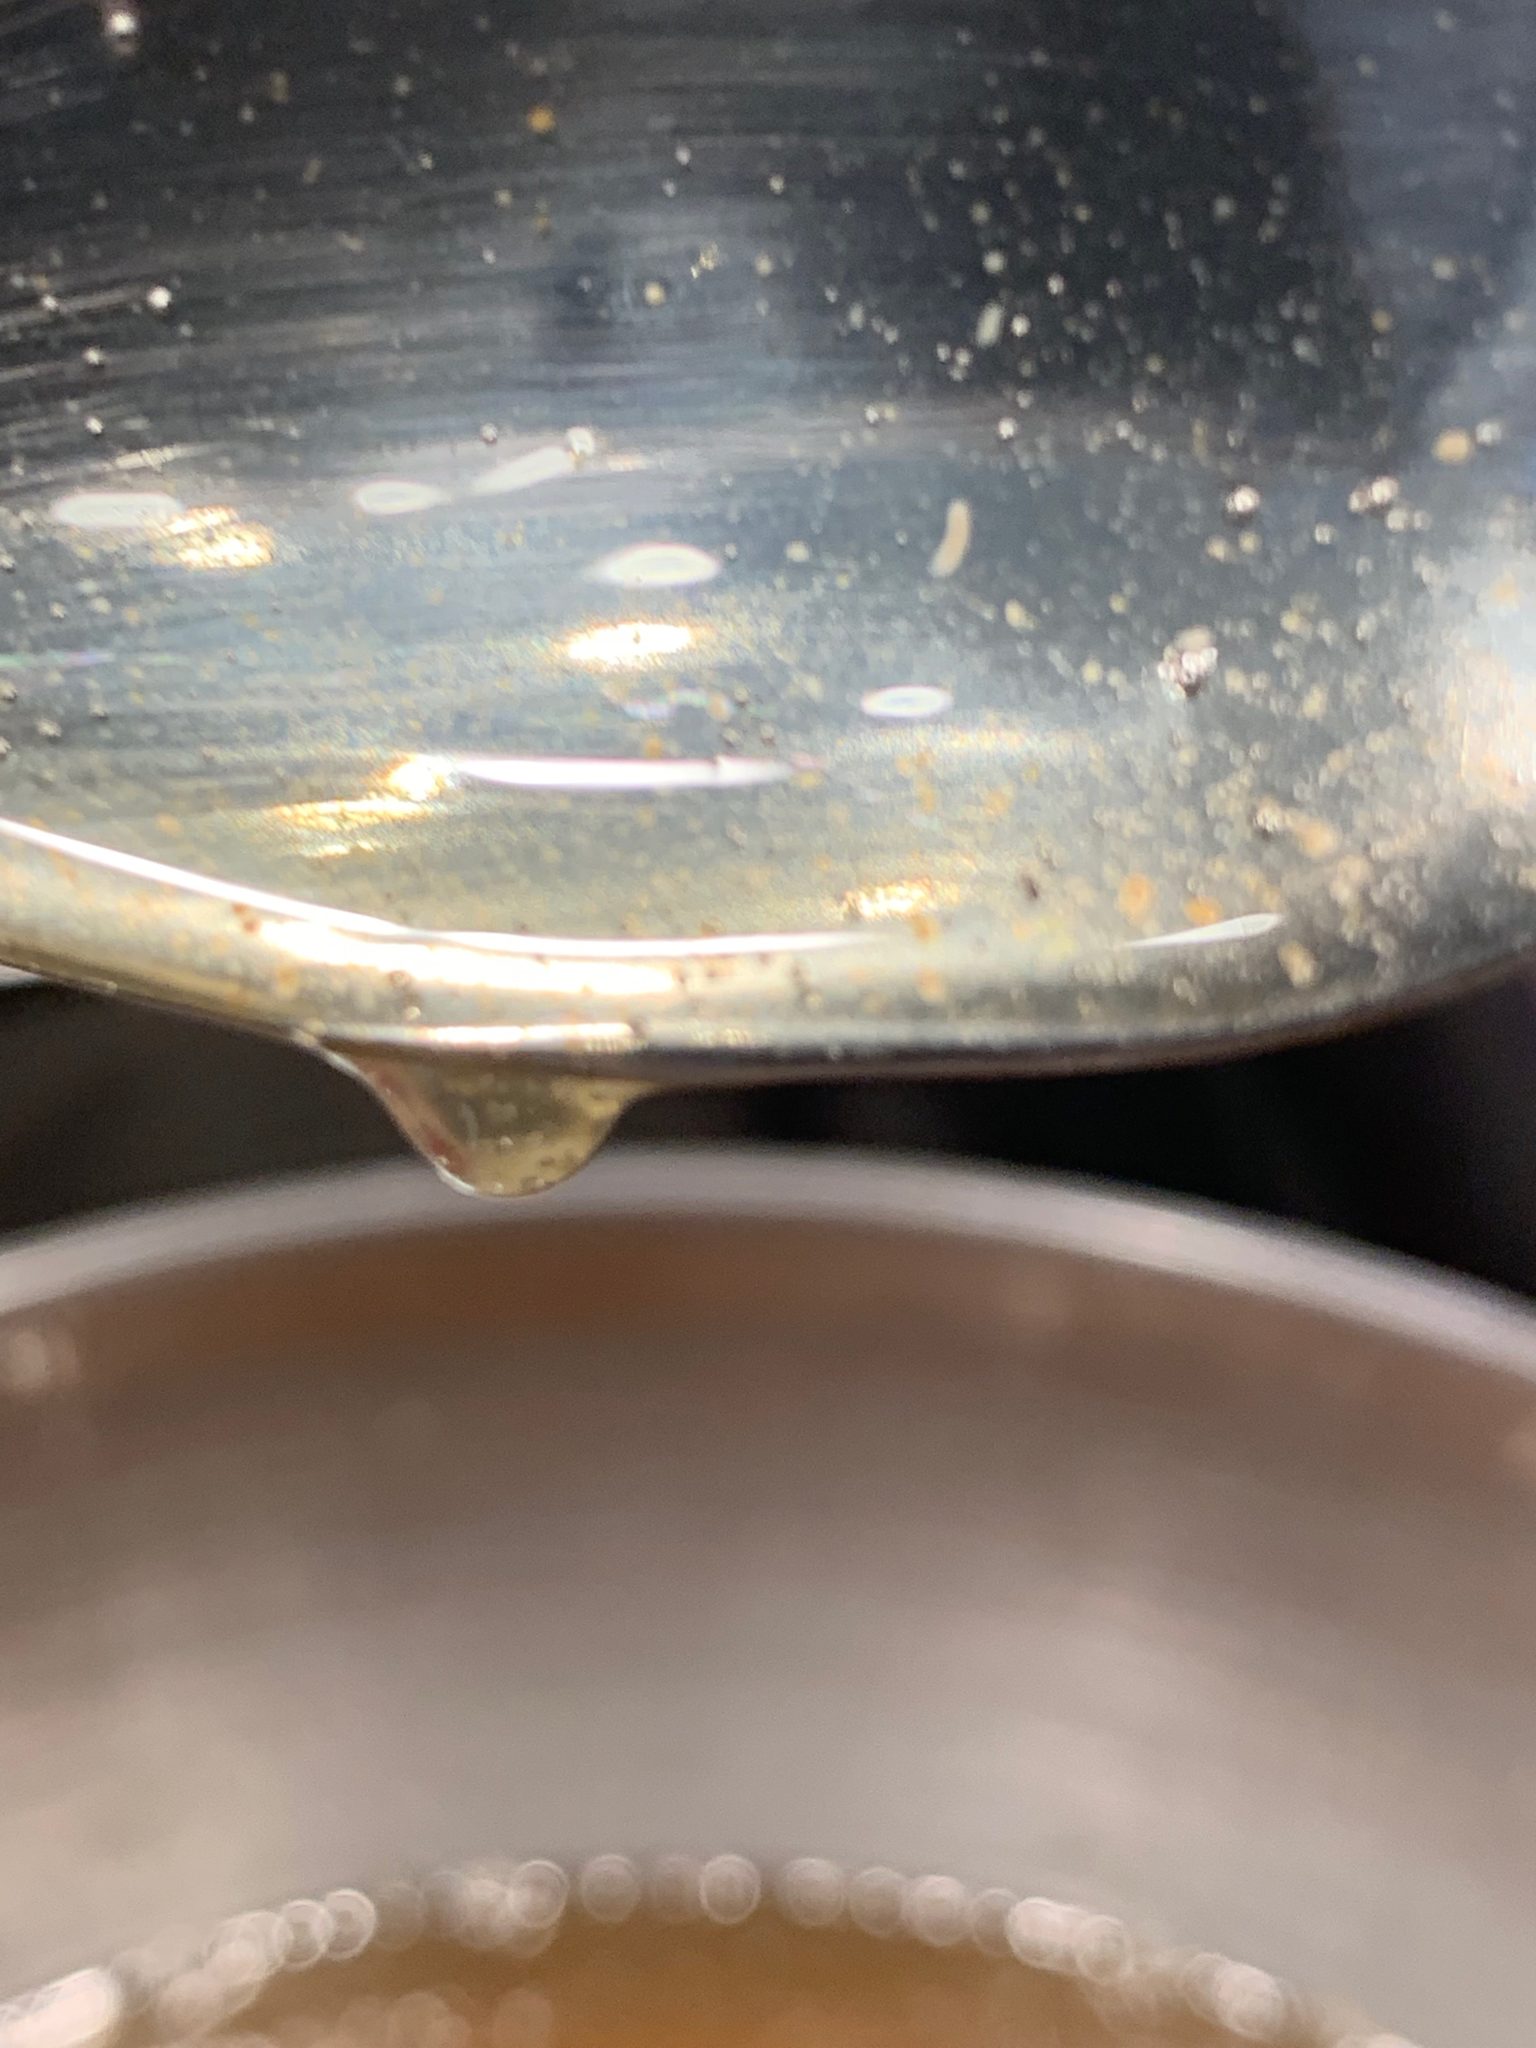 Sugar syrup boiled until thick will fall off the spoon in a sheet